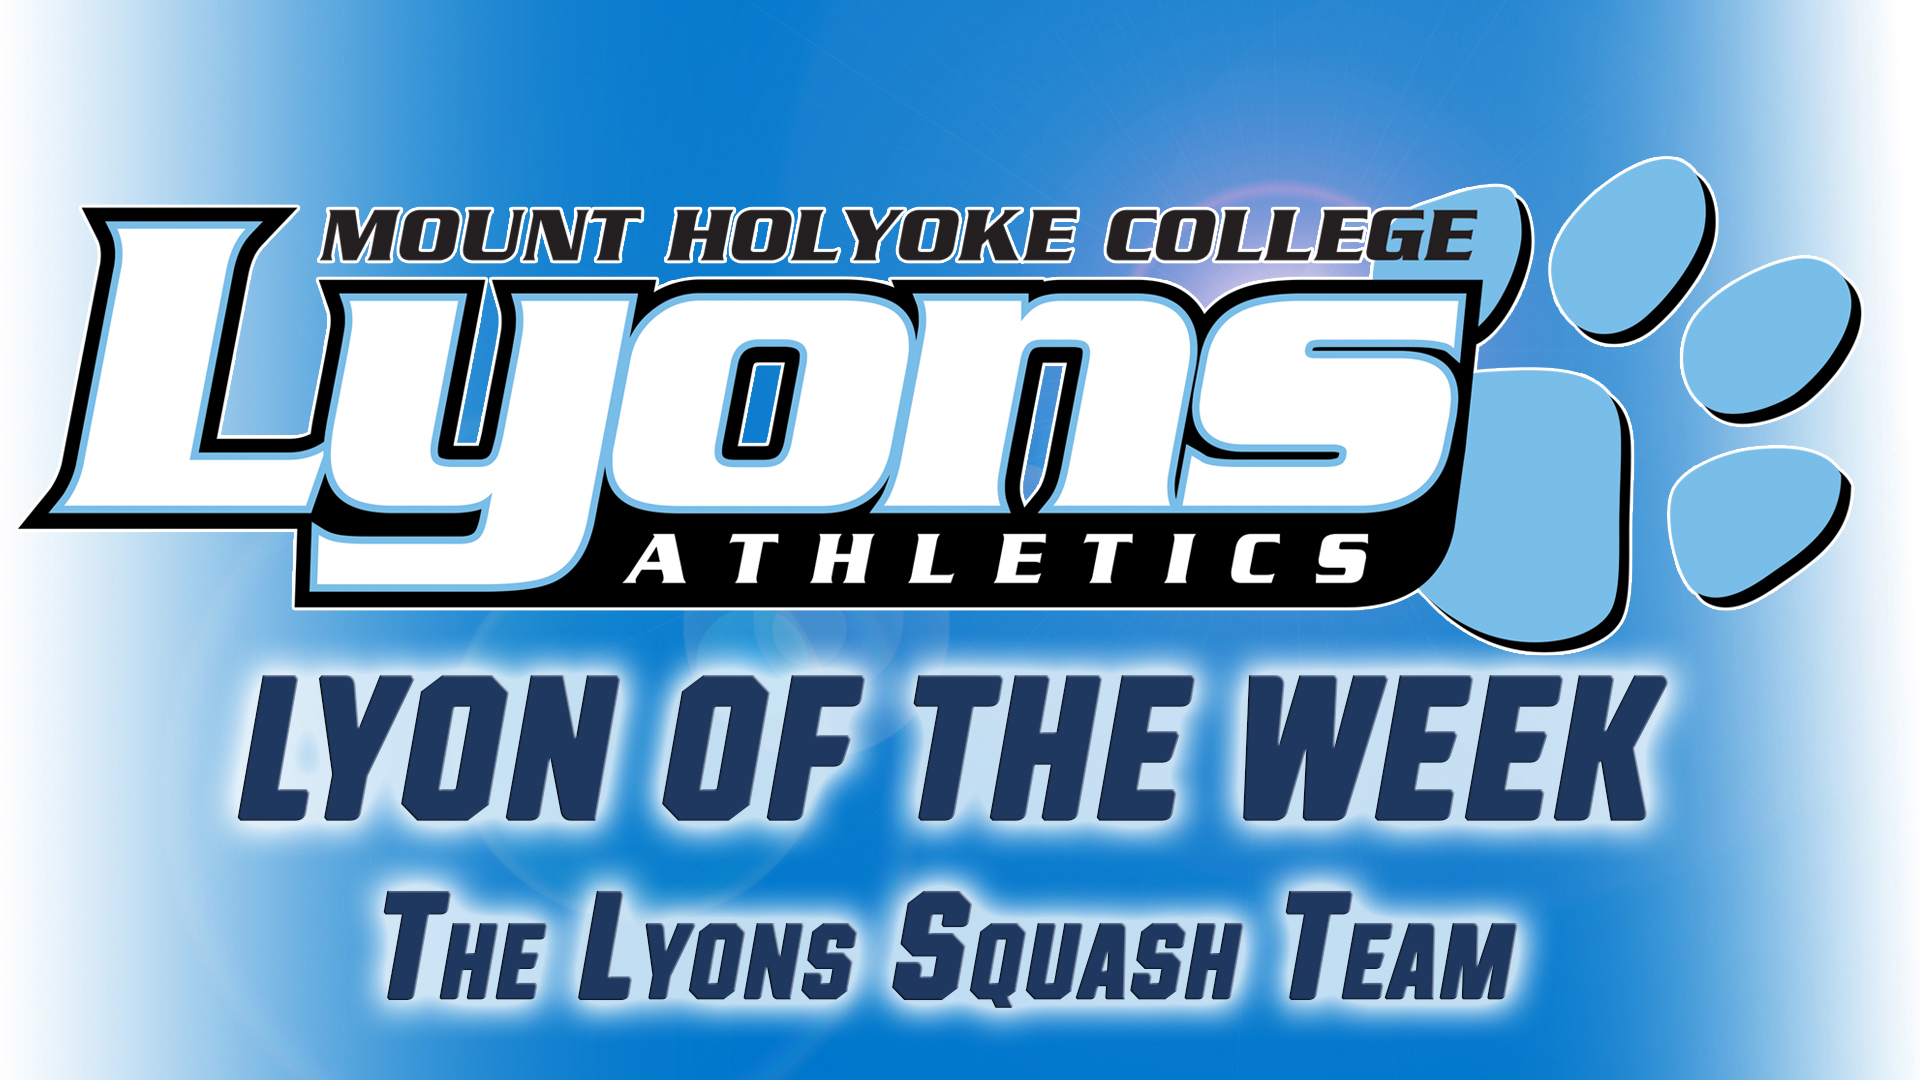 FEATURE: Lyon of the Week - Feb. 27th - The Squash Team